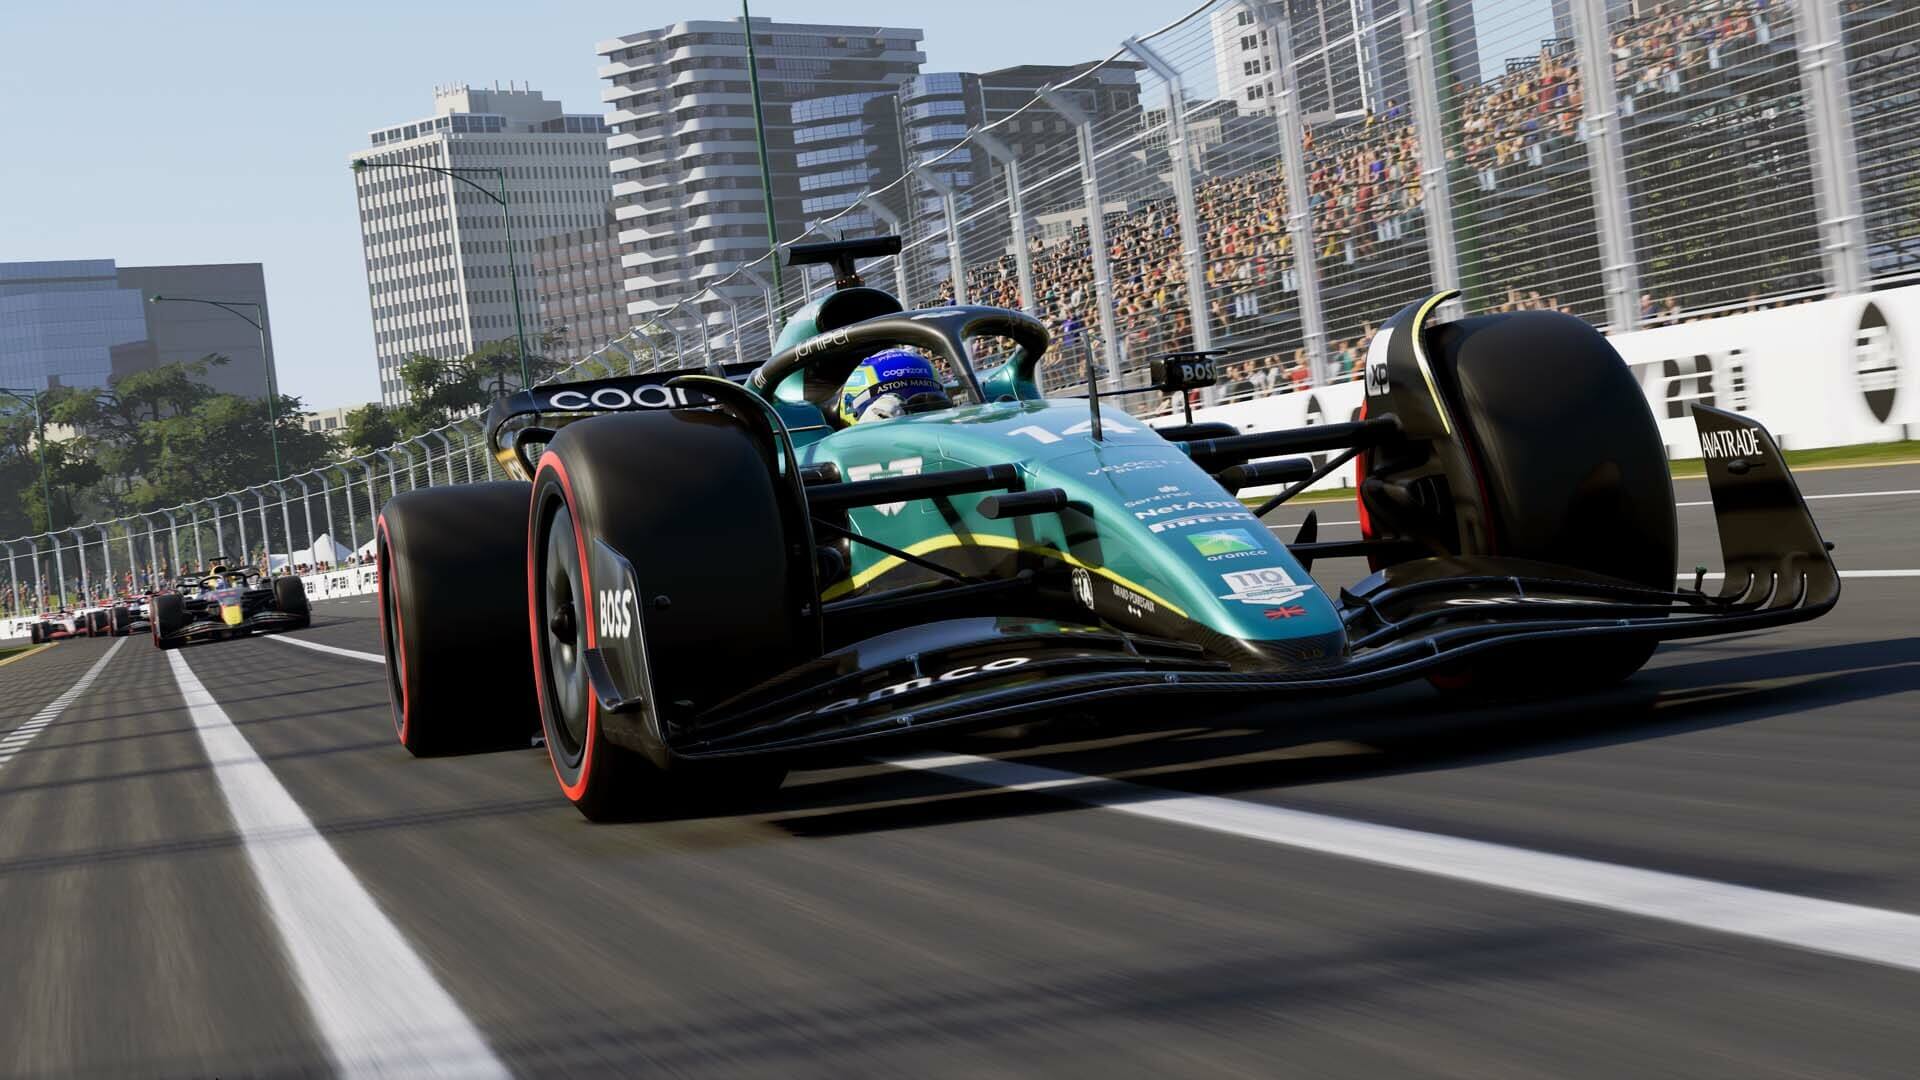 F1 22 deep dive video shows new VR gameplay